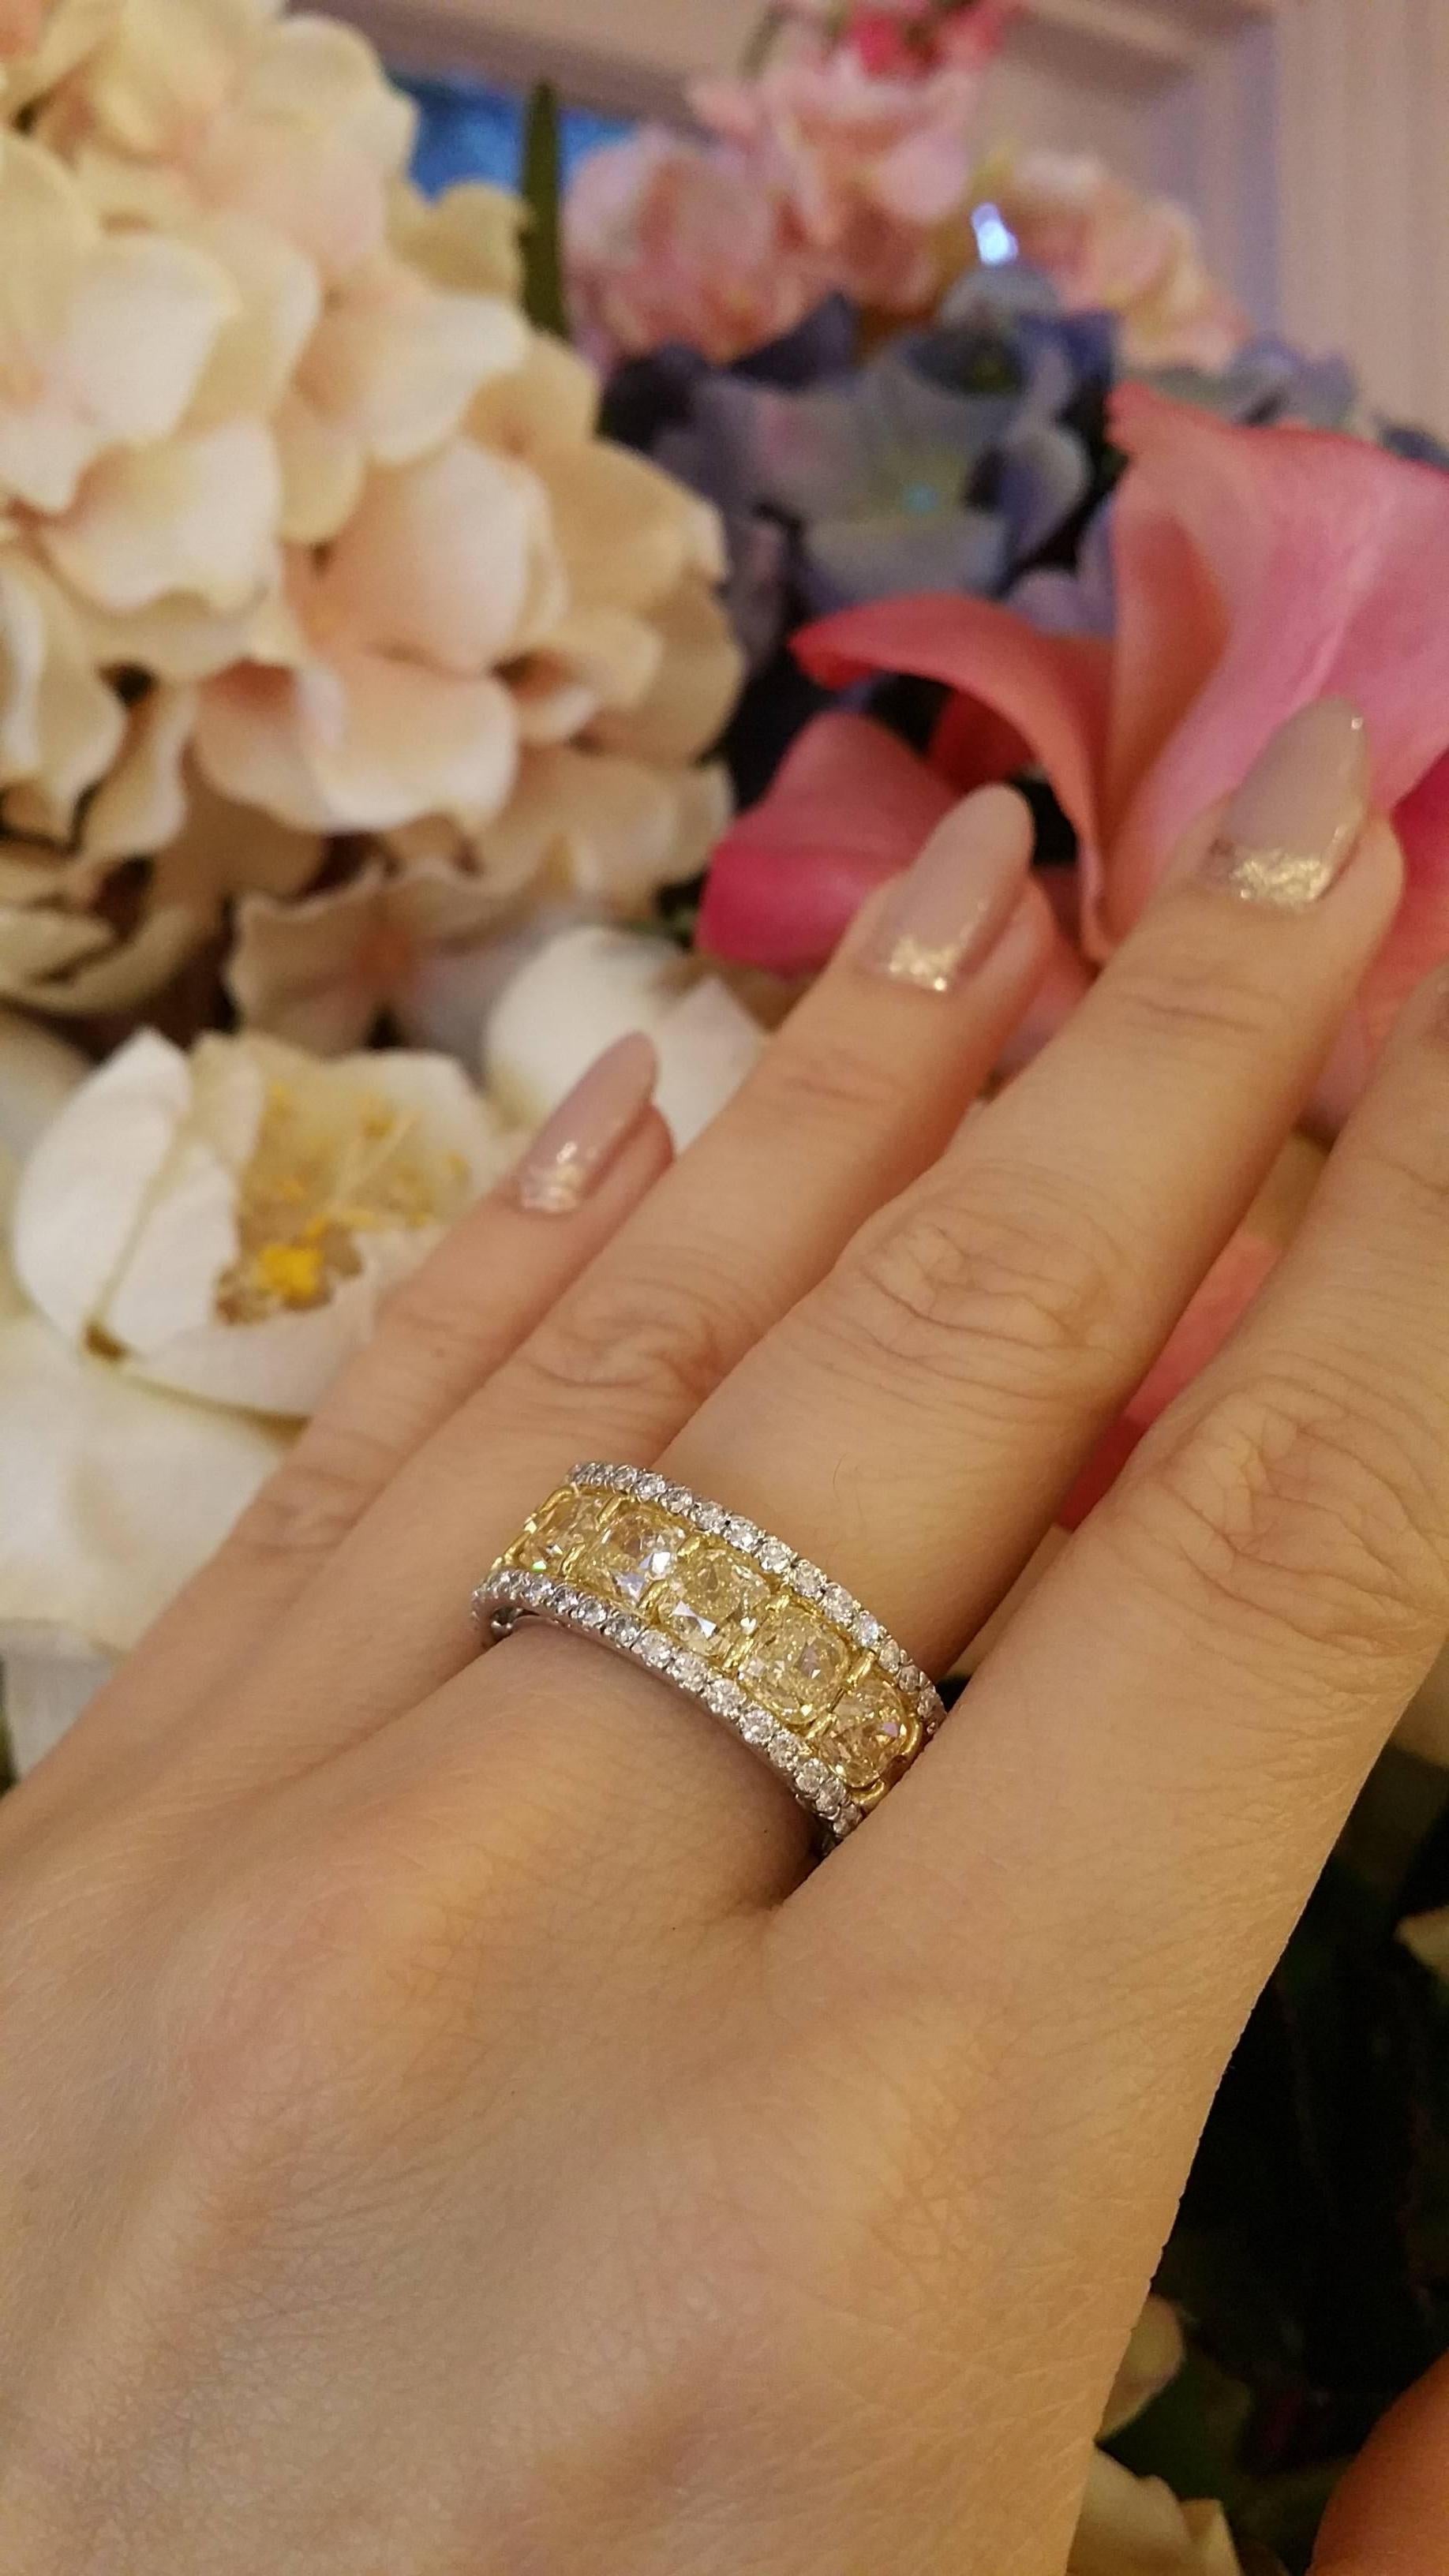 Eternity band featuring 15 beautiful cushion brilliant Yellow diamonds along the center weighing a total of 10.70 cts., and 80 white round brilliant cut diamonds along the edge weighing 1.68 ct. All high quality diamonds with approx VS in clarity.